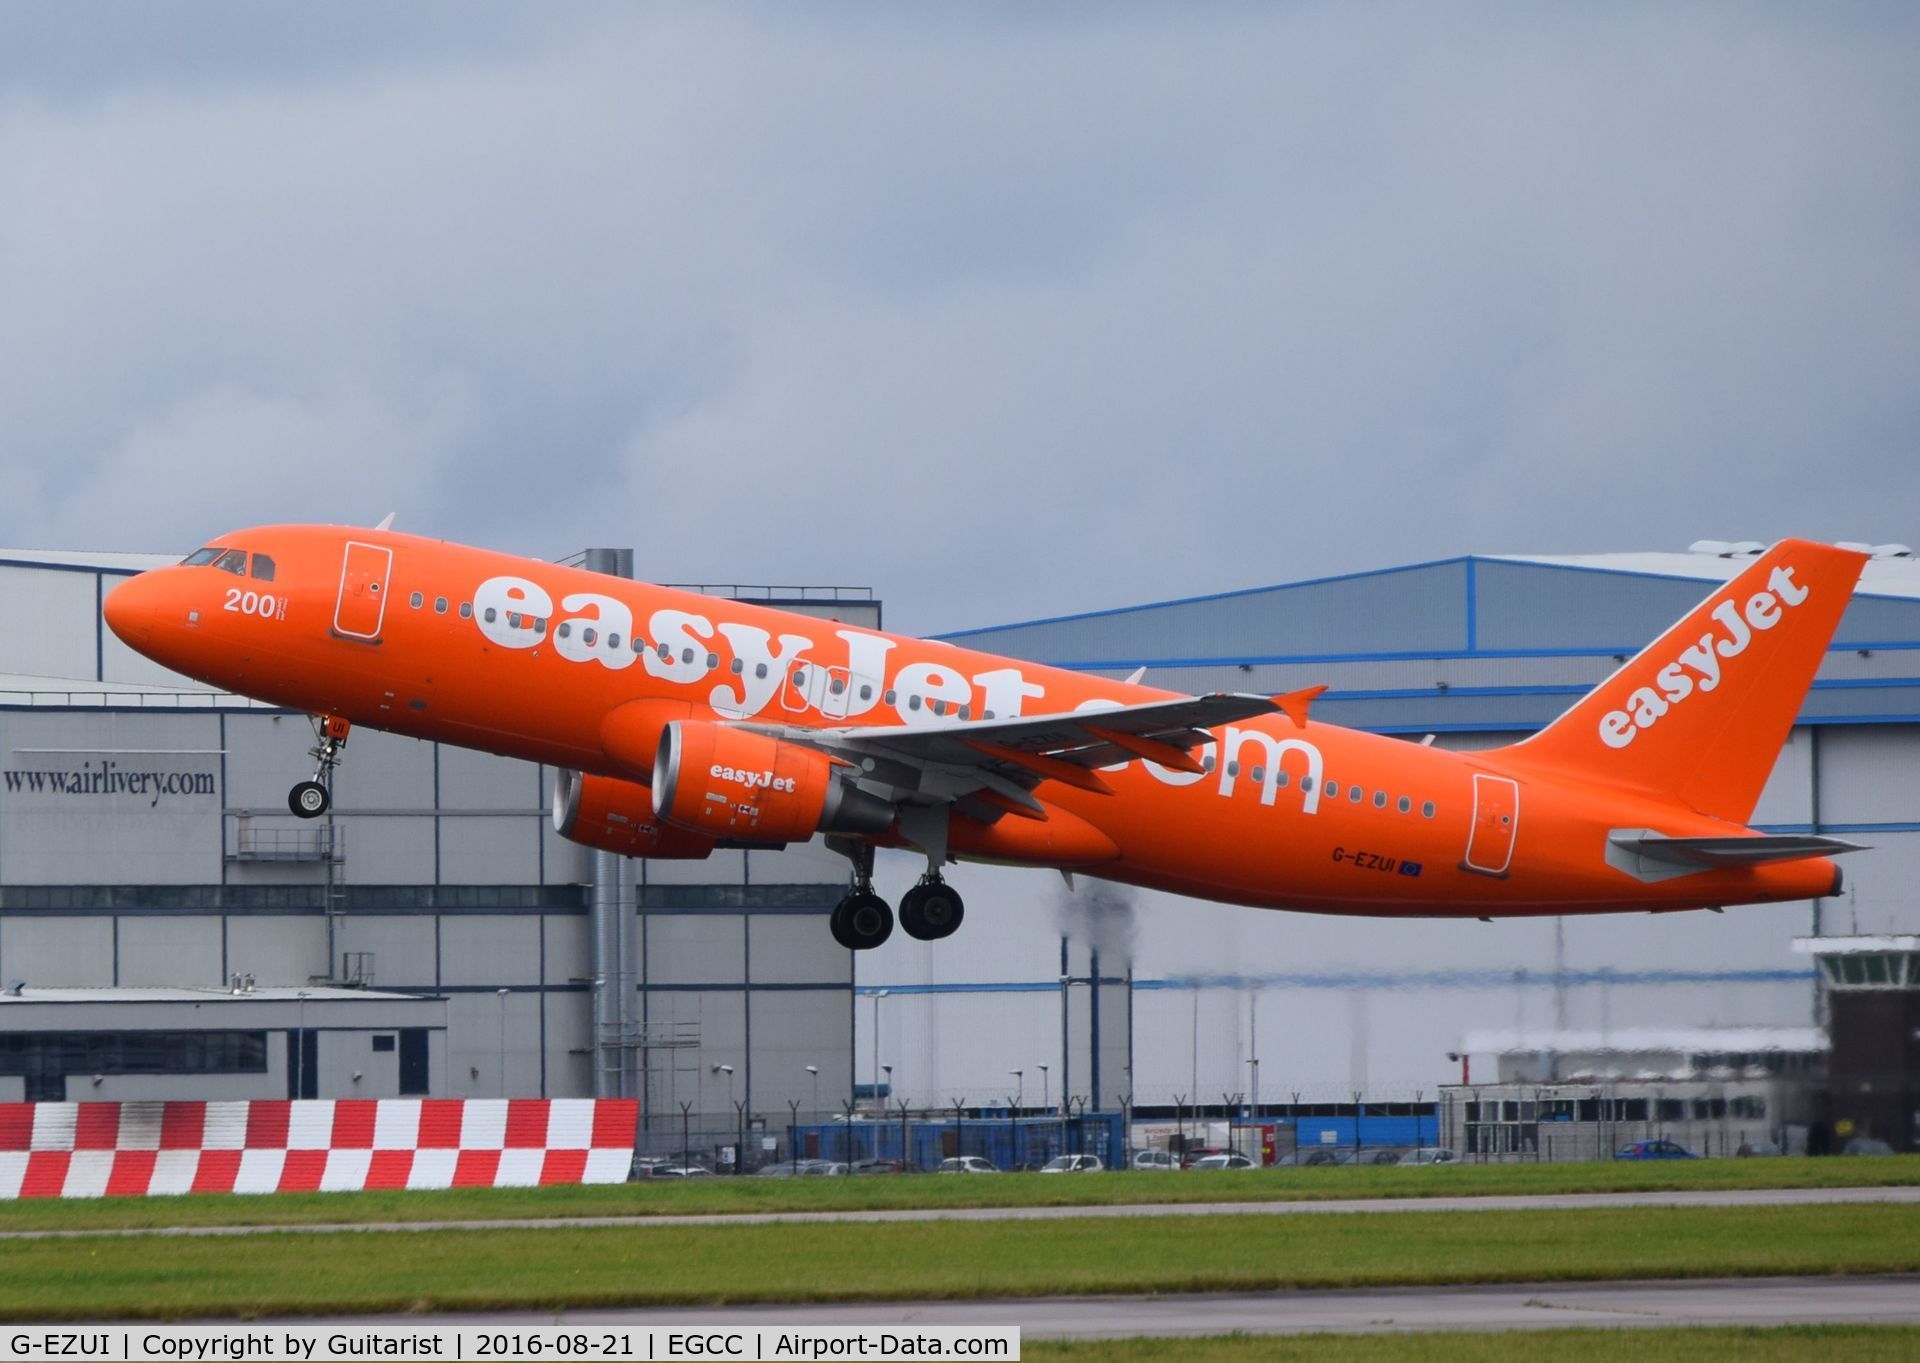 G-EZUI, 2011 Airbus A320-214 C/N 4721, At Manchester